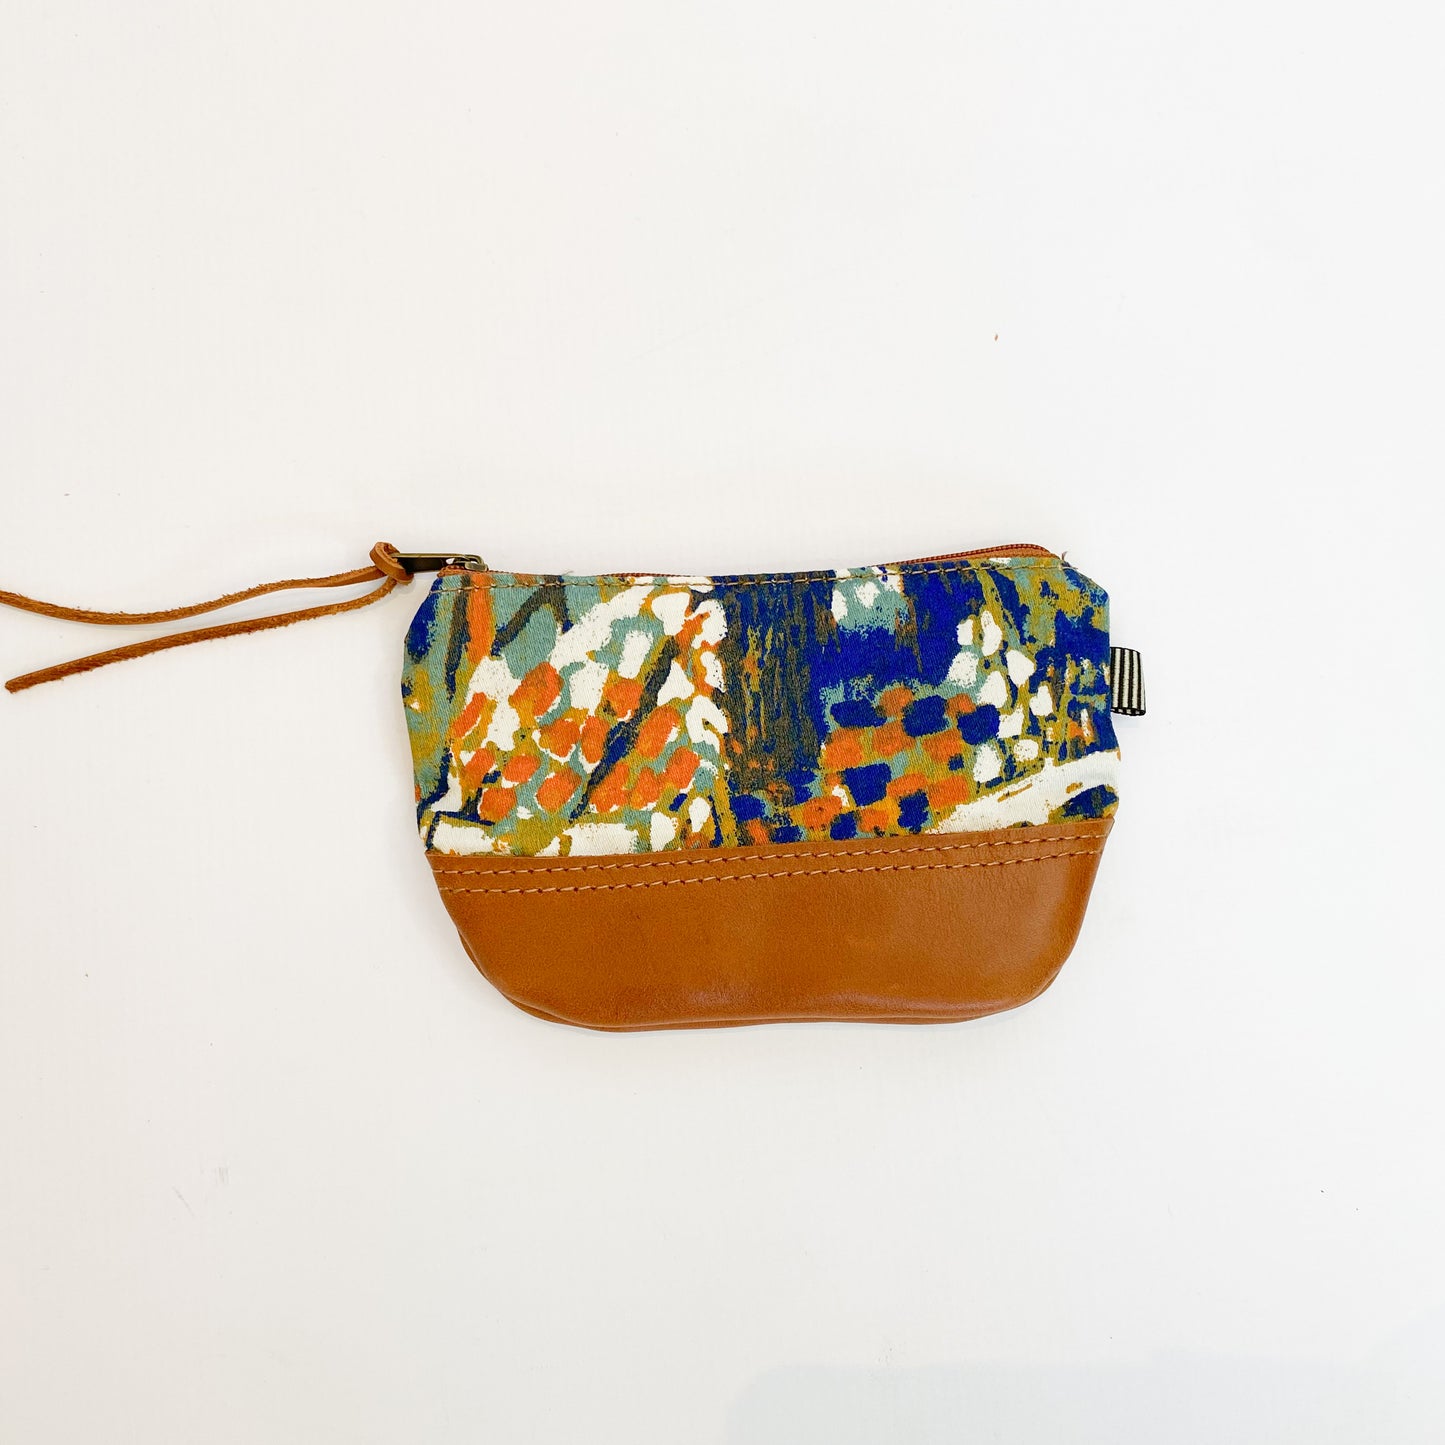 Gia leather and art purse